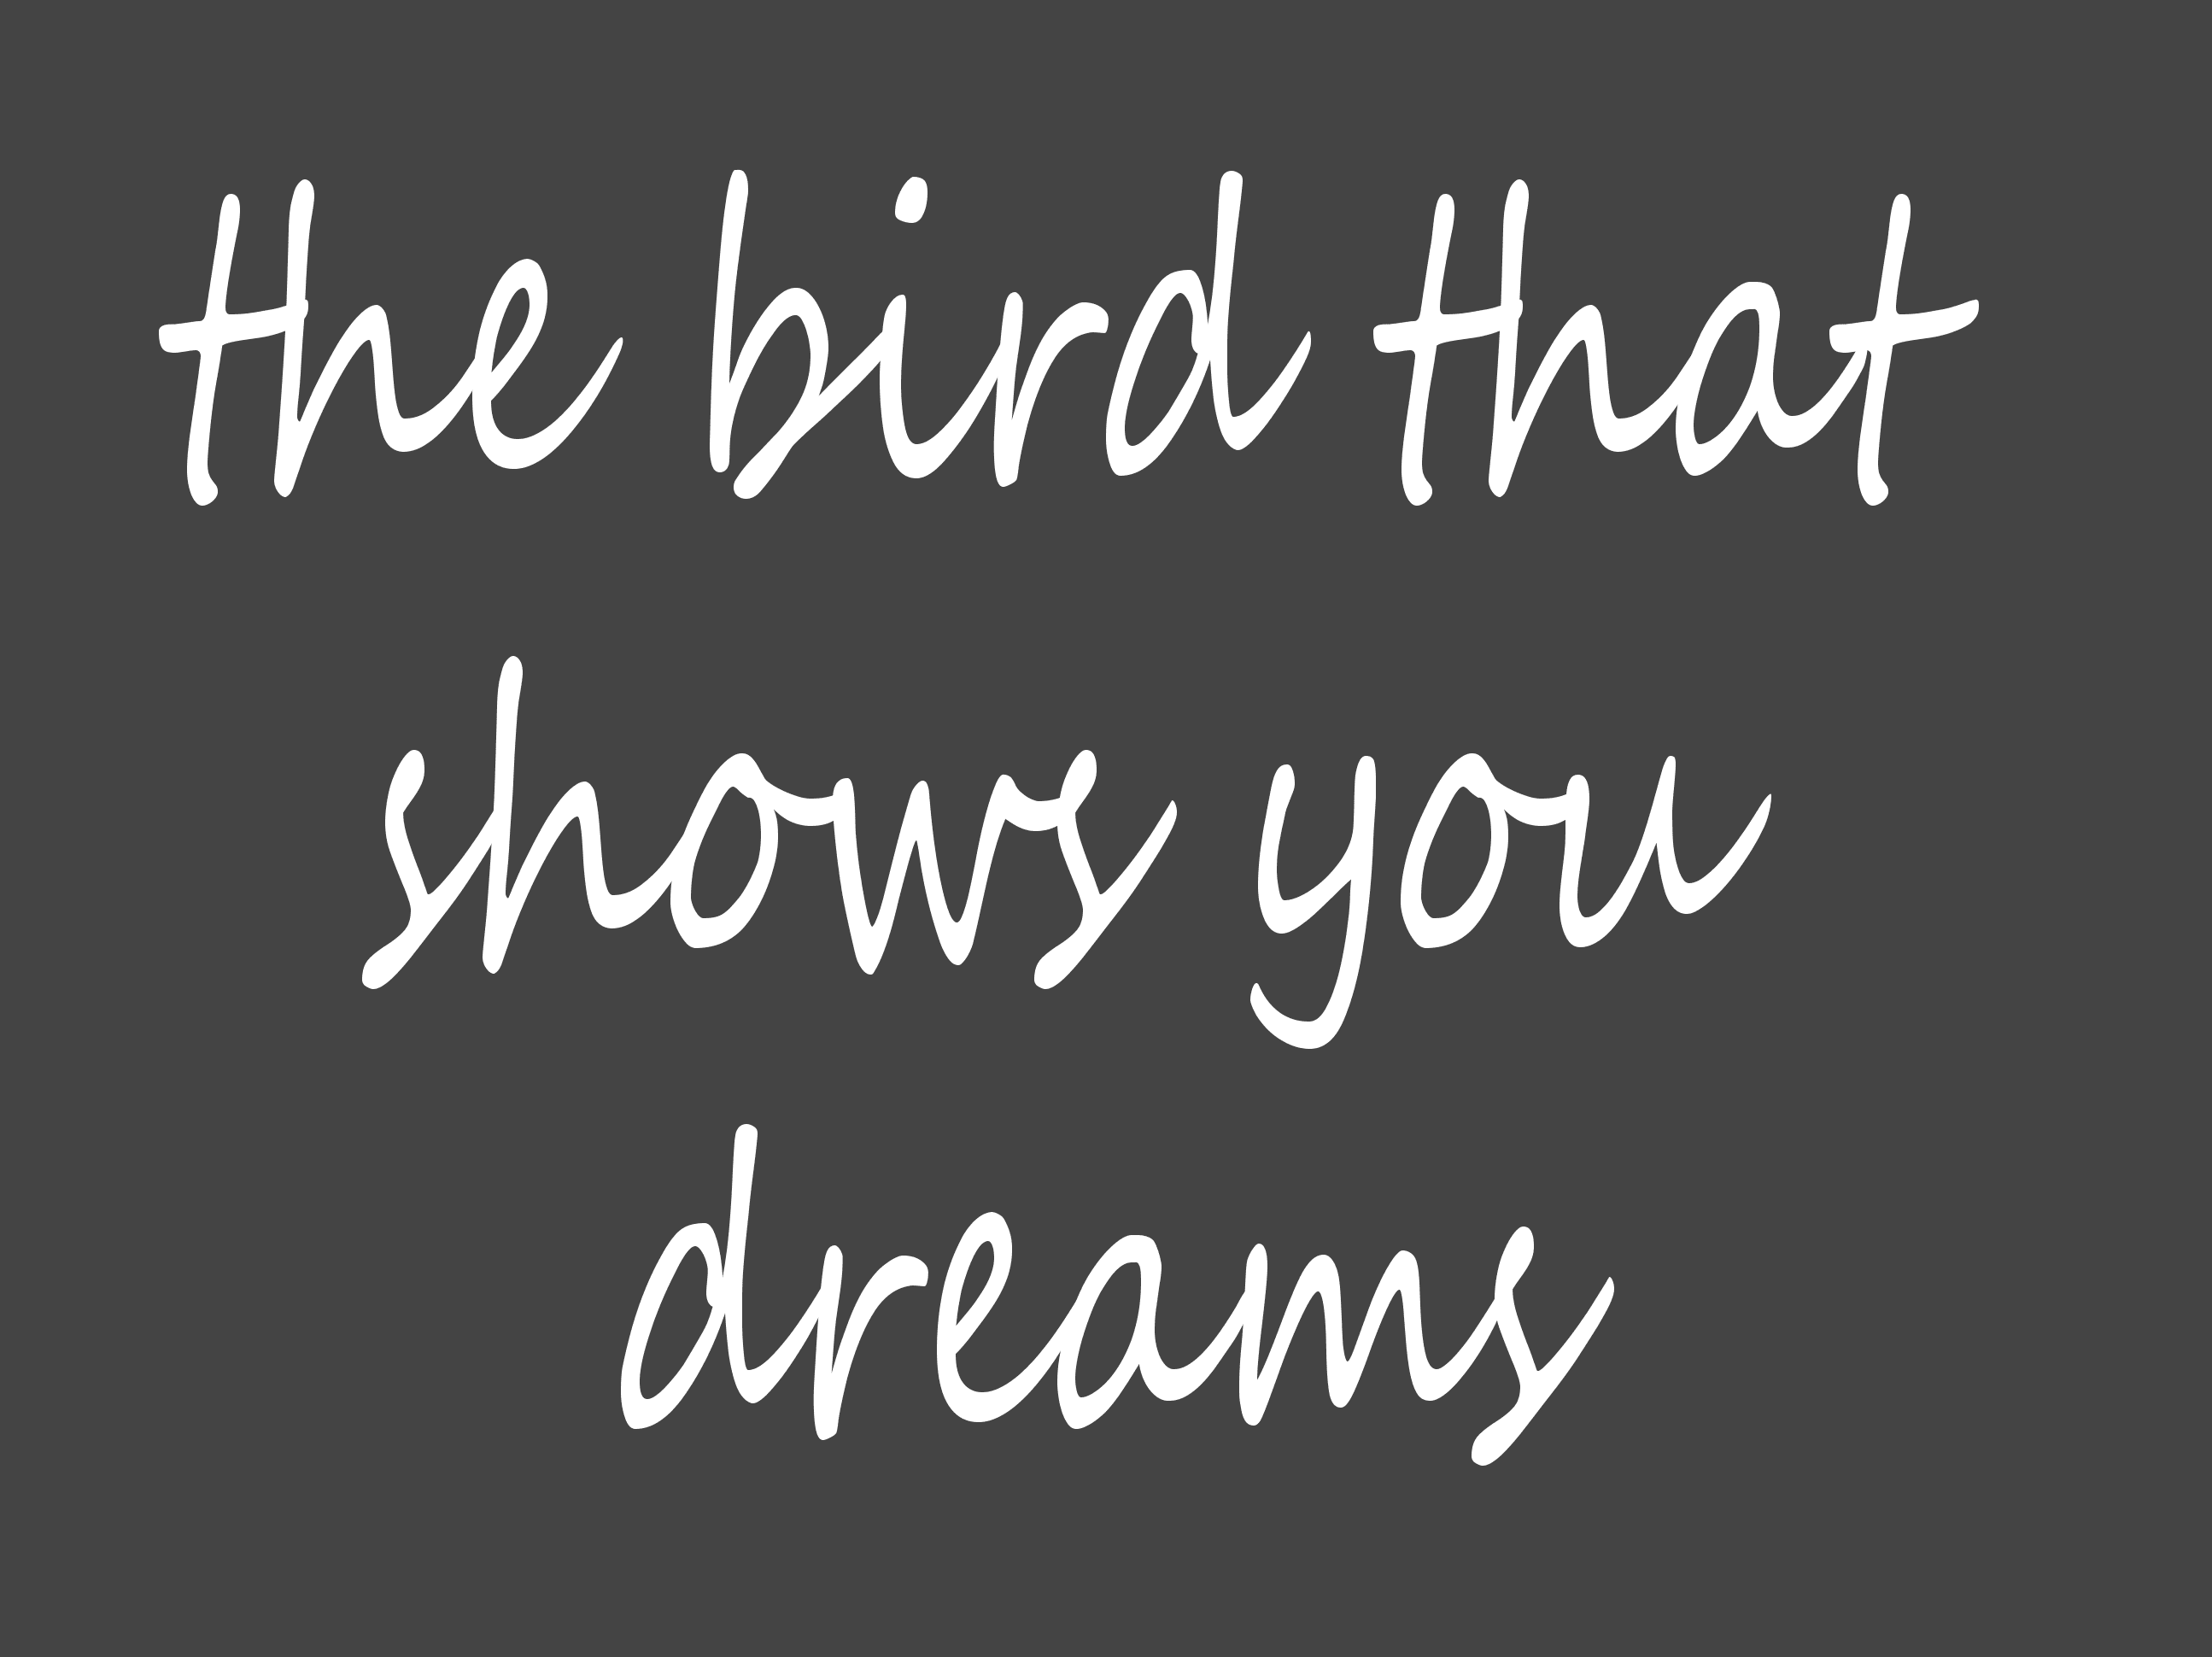 The bird that shows you dreams